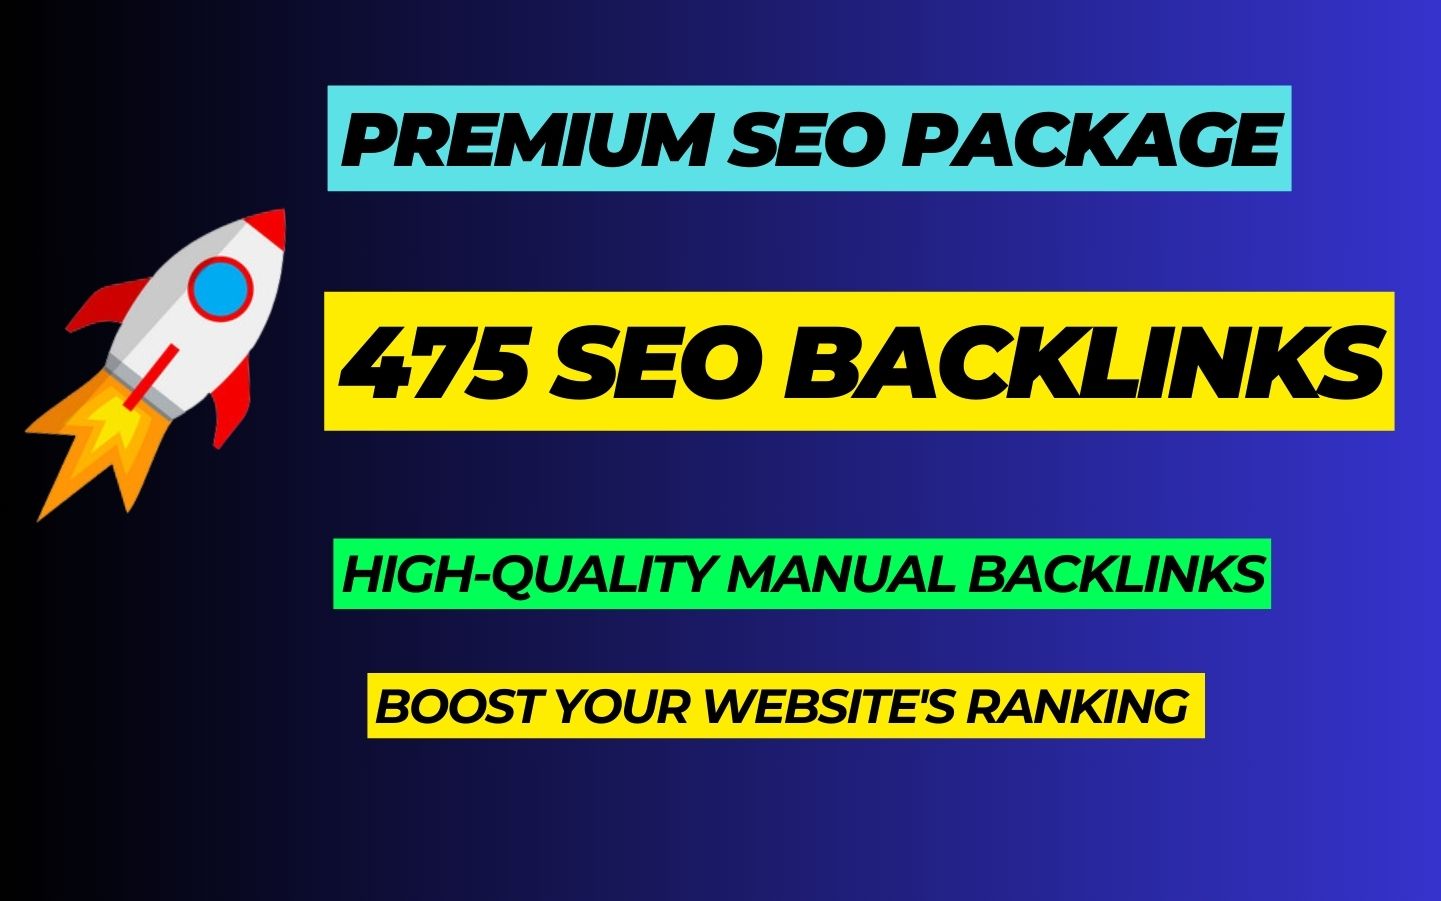 "Boost Your Website's Ranking with Our Premium SEO Package - 475 High-Quality Manual Backlinks!